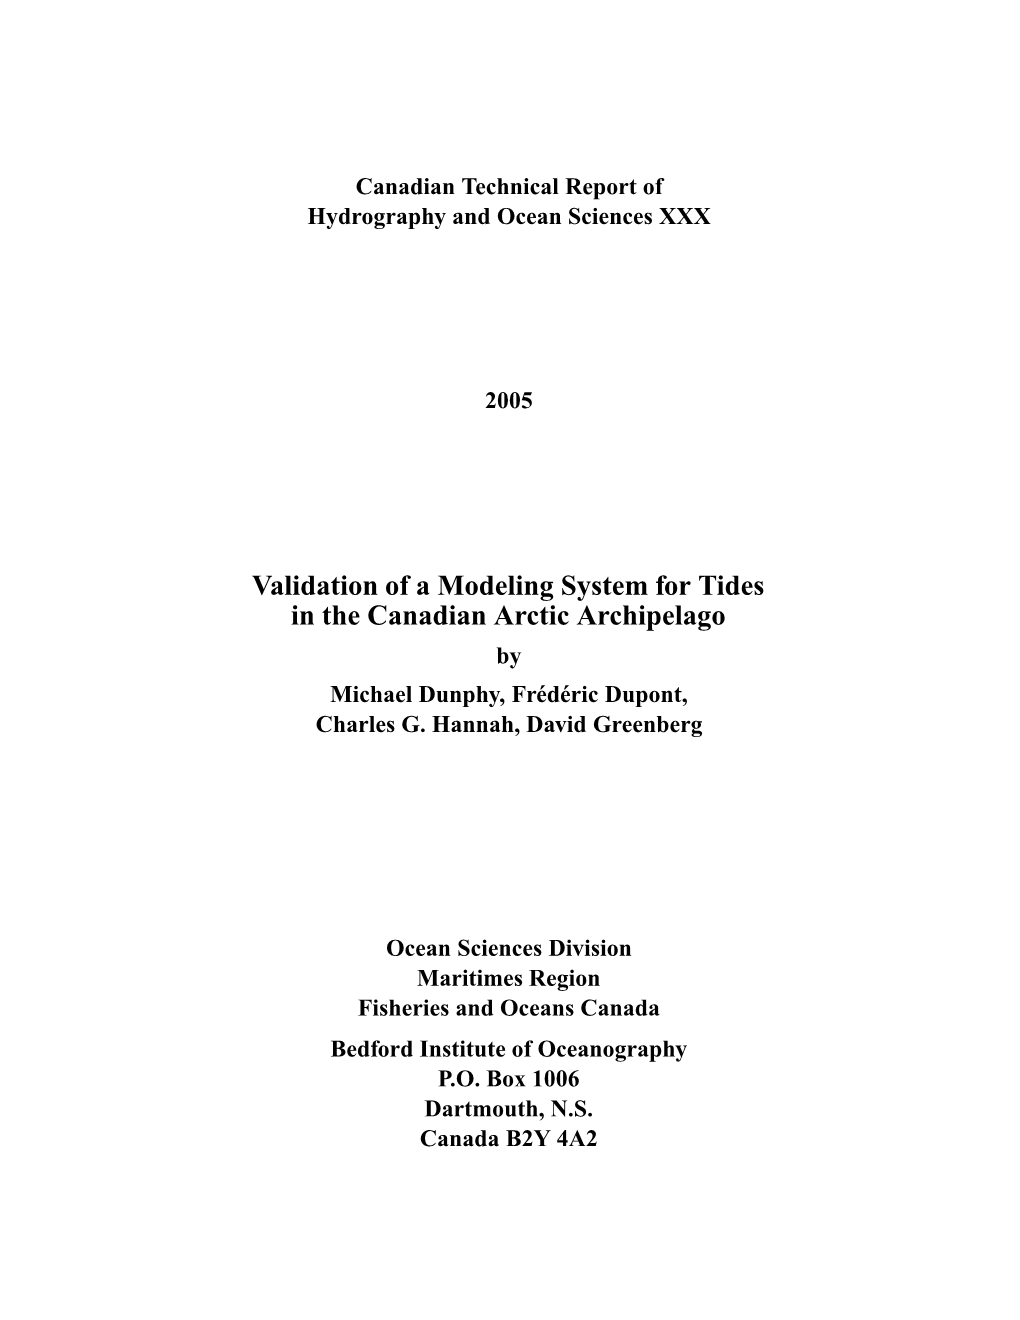 Validation of a Modeling System for Tides in the Canadian Arctic Archipelago by Michael Dunphy, Fred´ Eric´ Dupont, Charles G